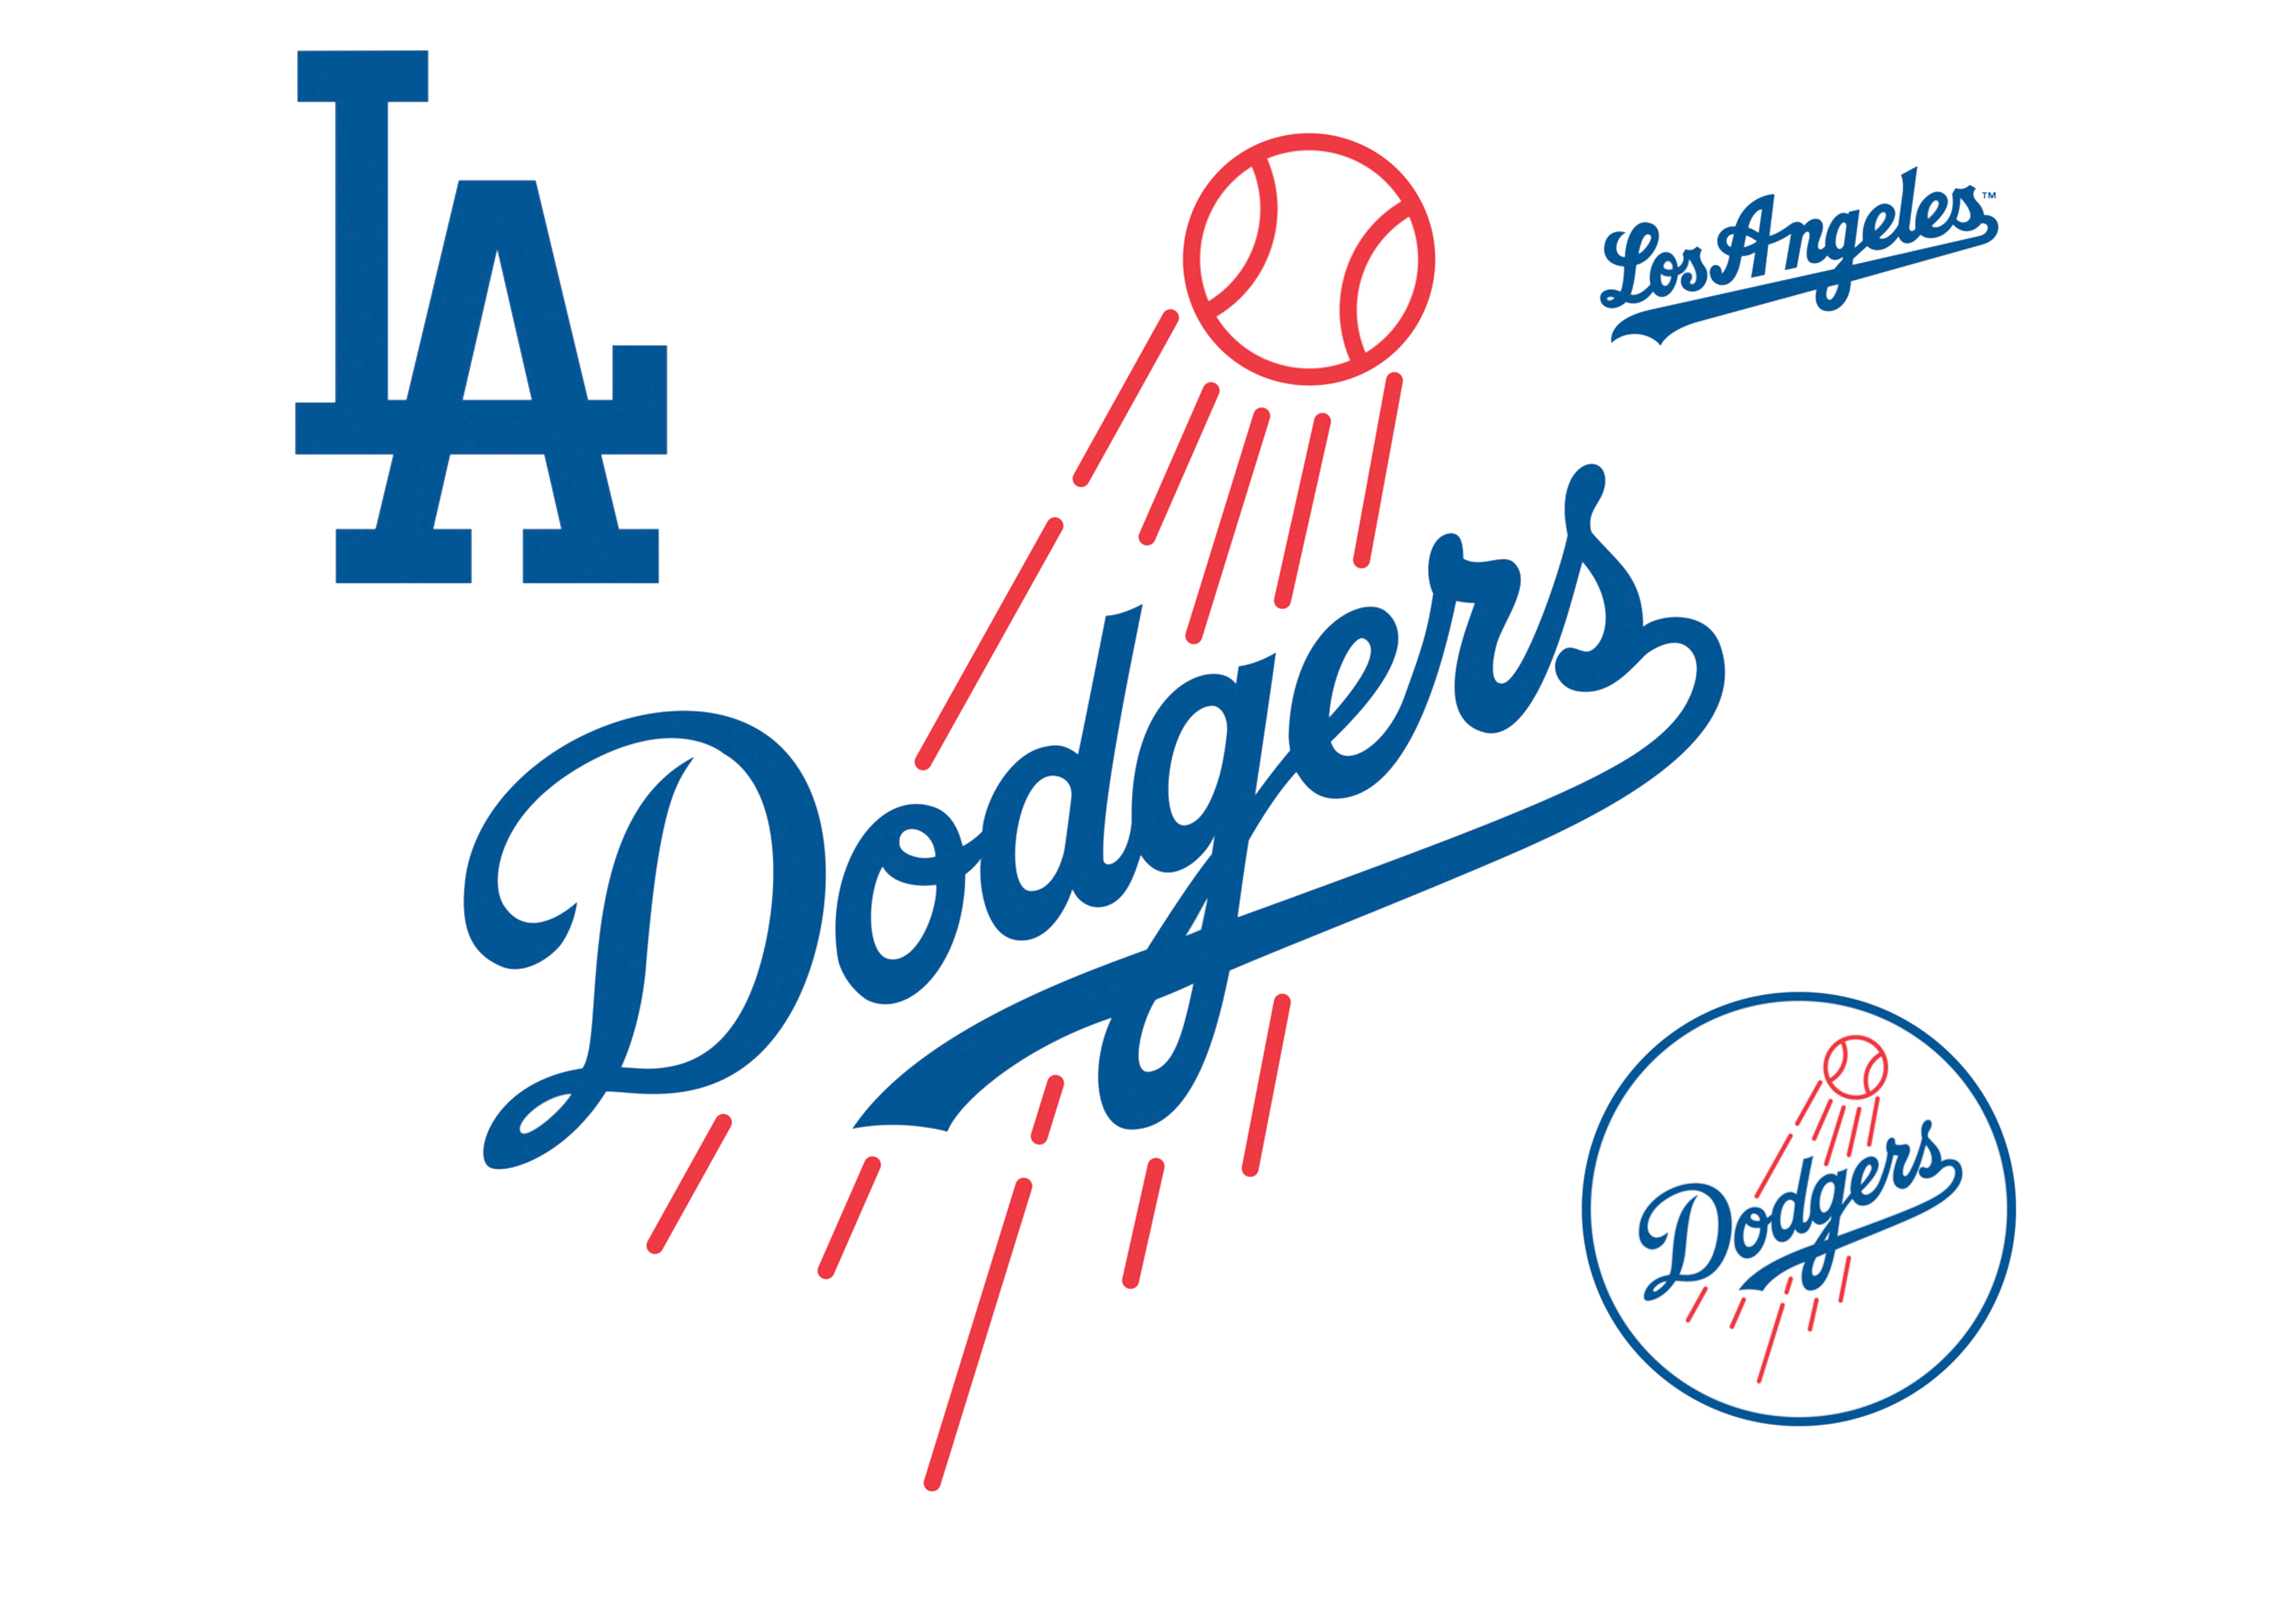 All Dodgers Logos